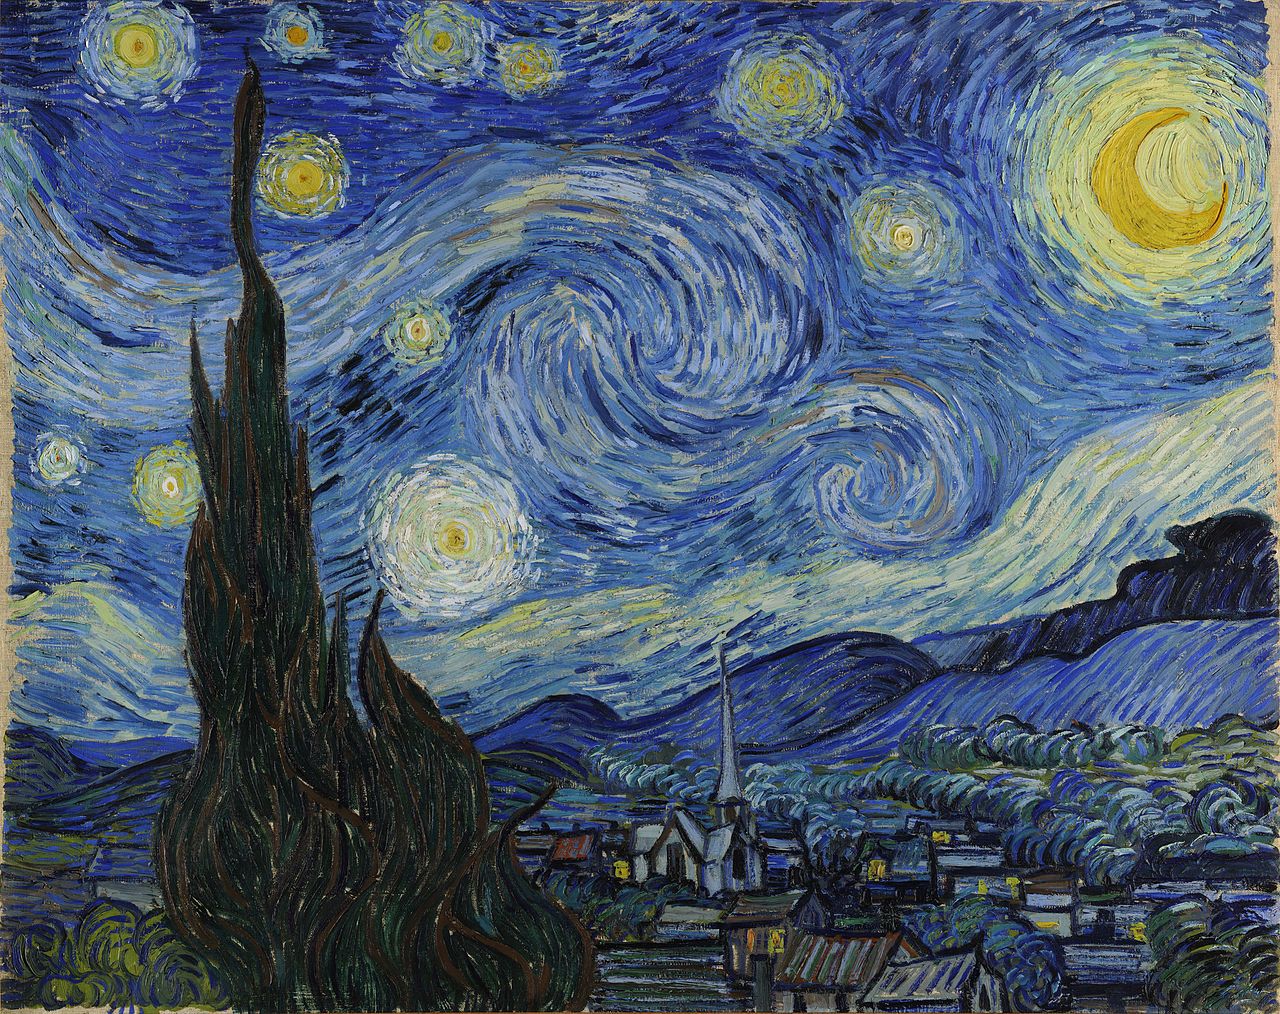 Perhaps his best-known work, The Starry Night (1889) is Van Gogh’s interpretation of the view from his bedroom in a monastery-turned-asylum where he lived for a year. 
